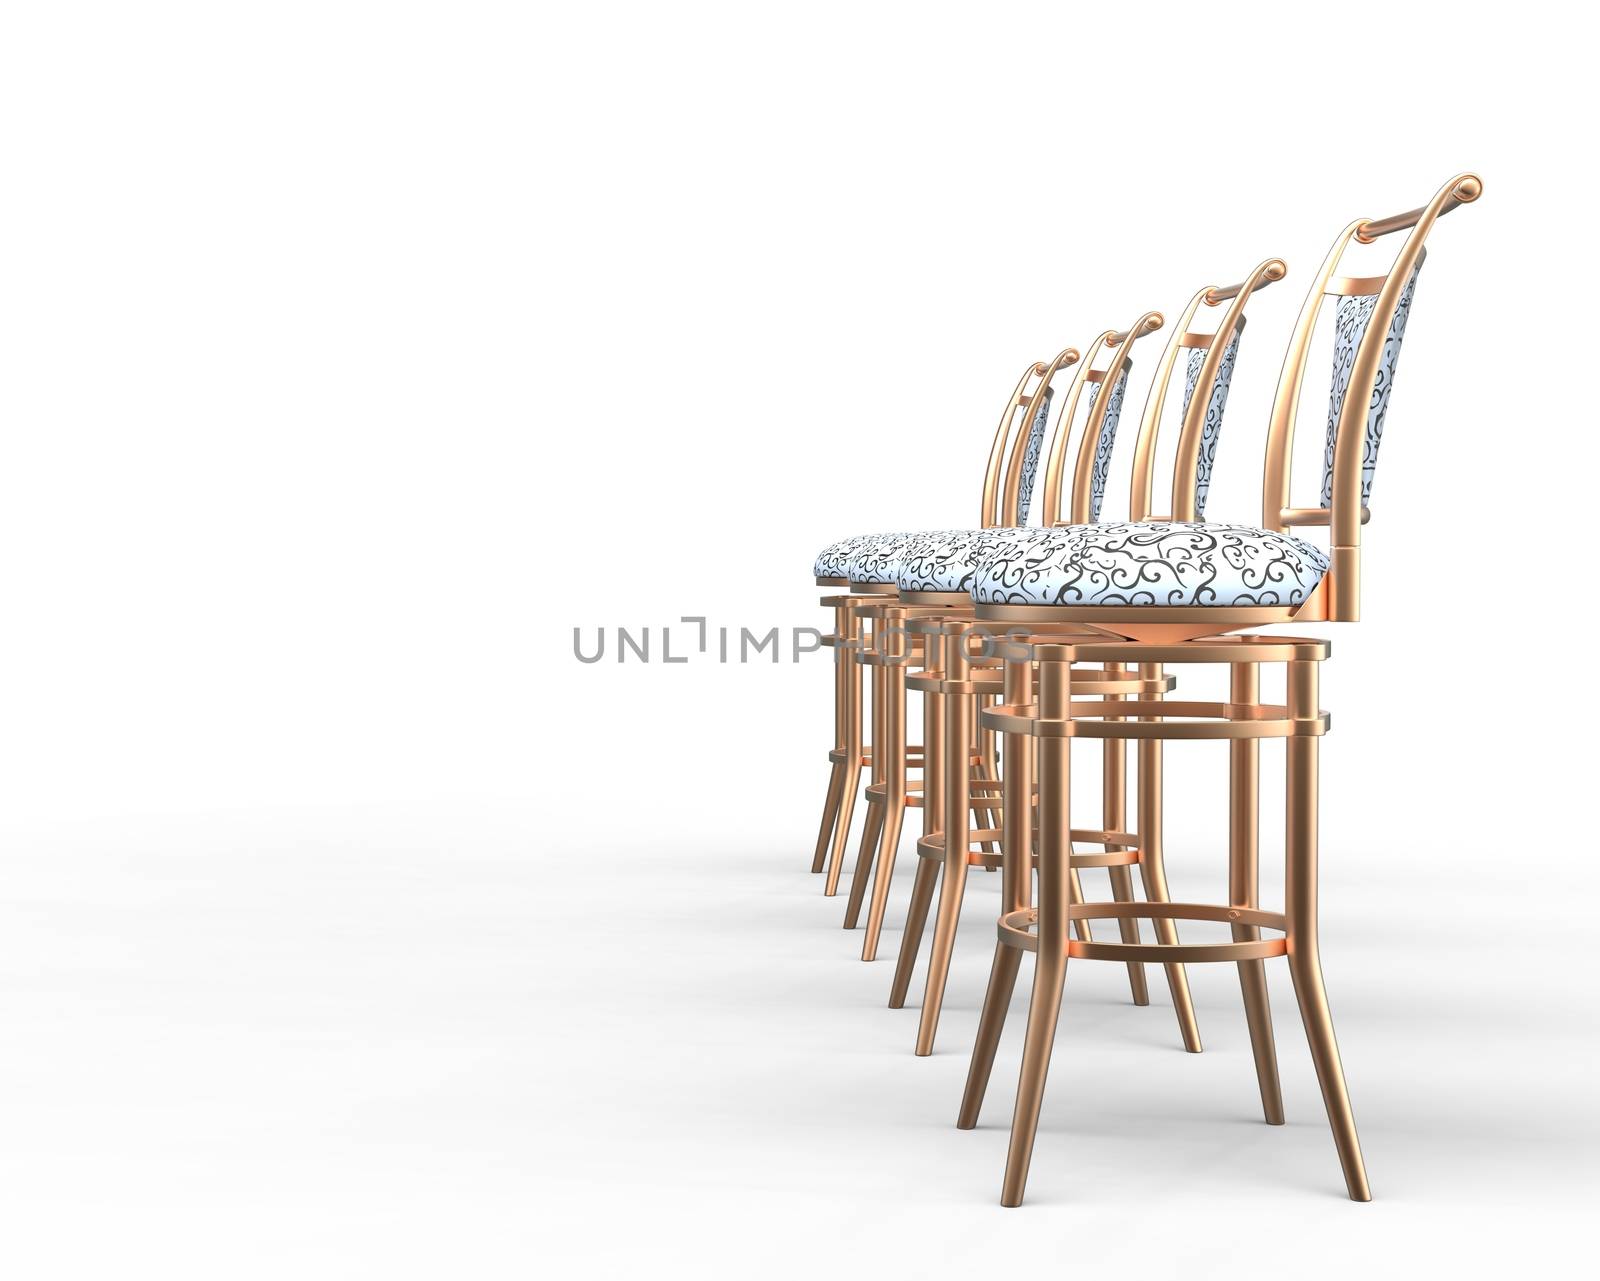 Four coffee shop chairs on white background - side view.